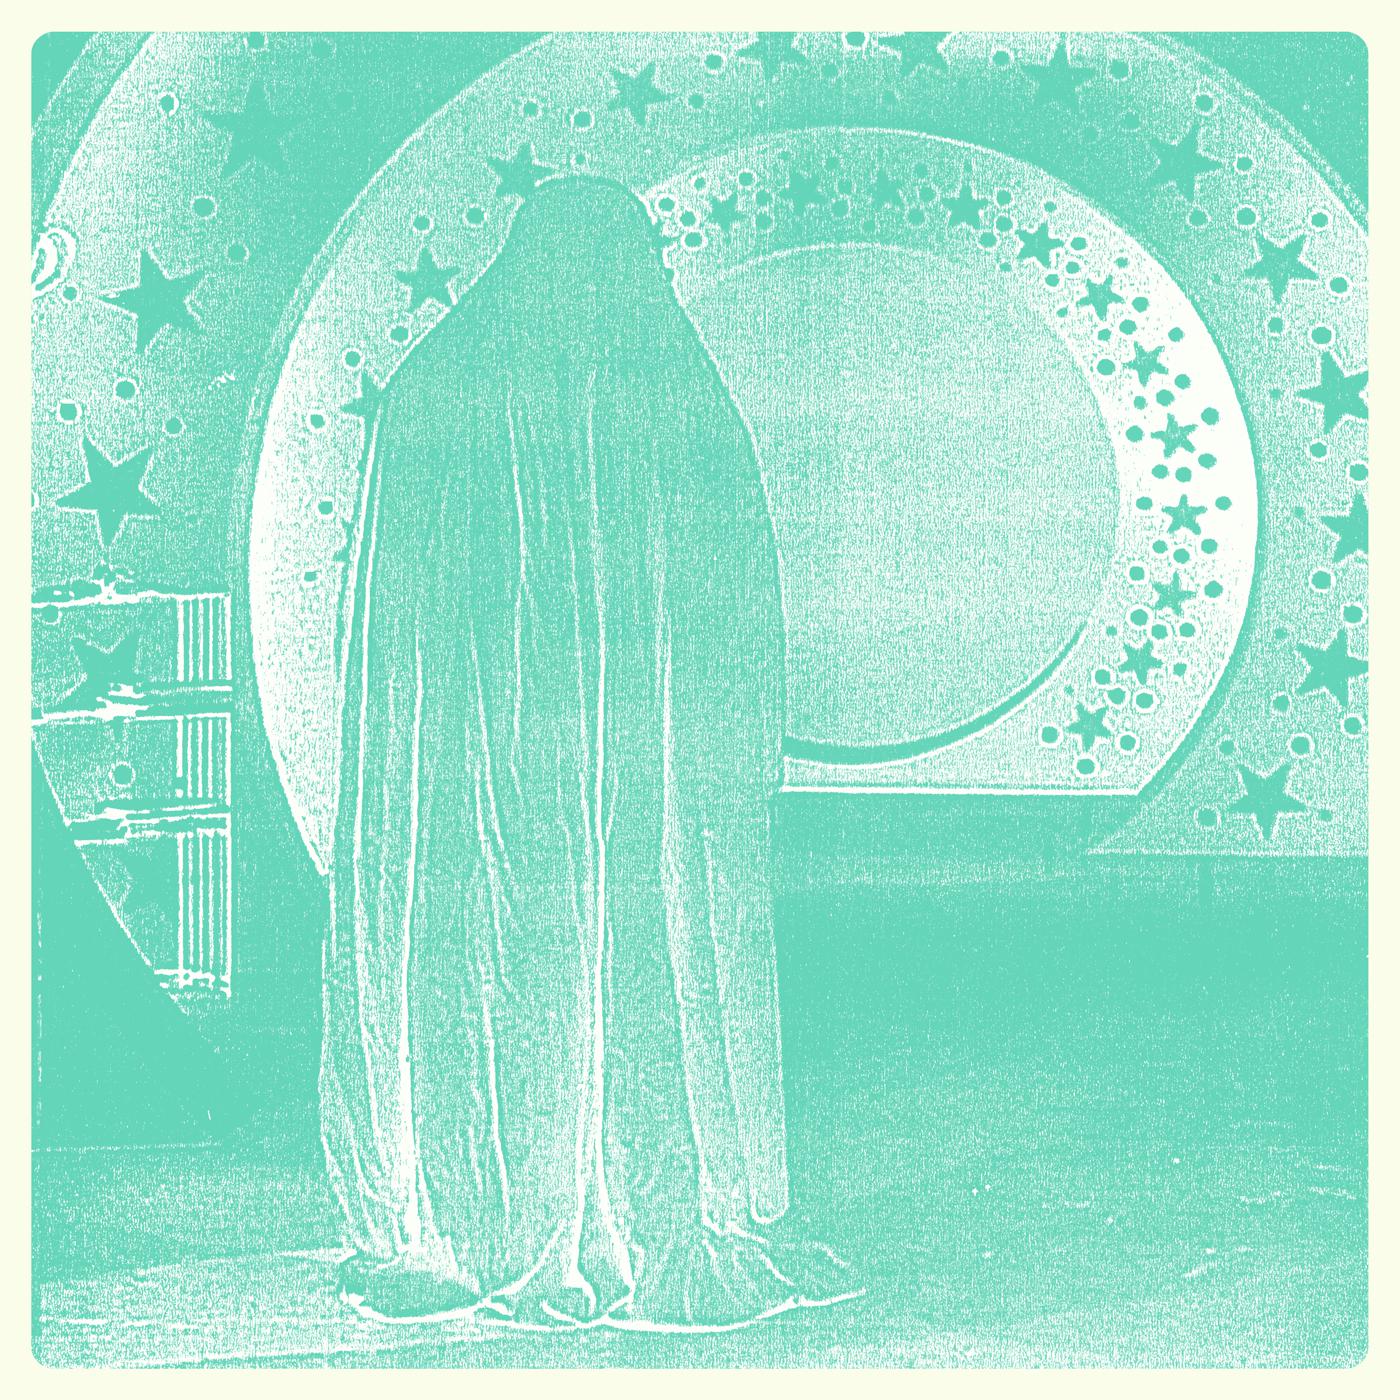 Hookworms - Form and Function